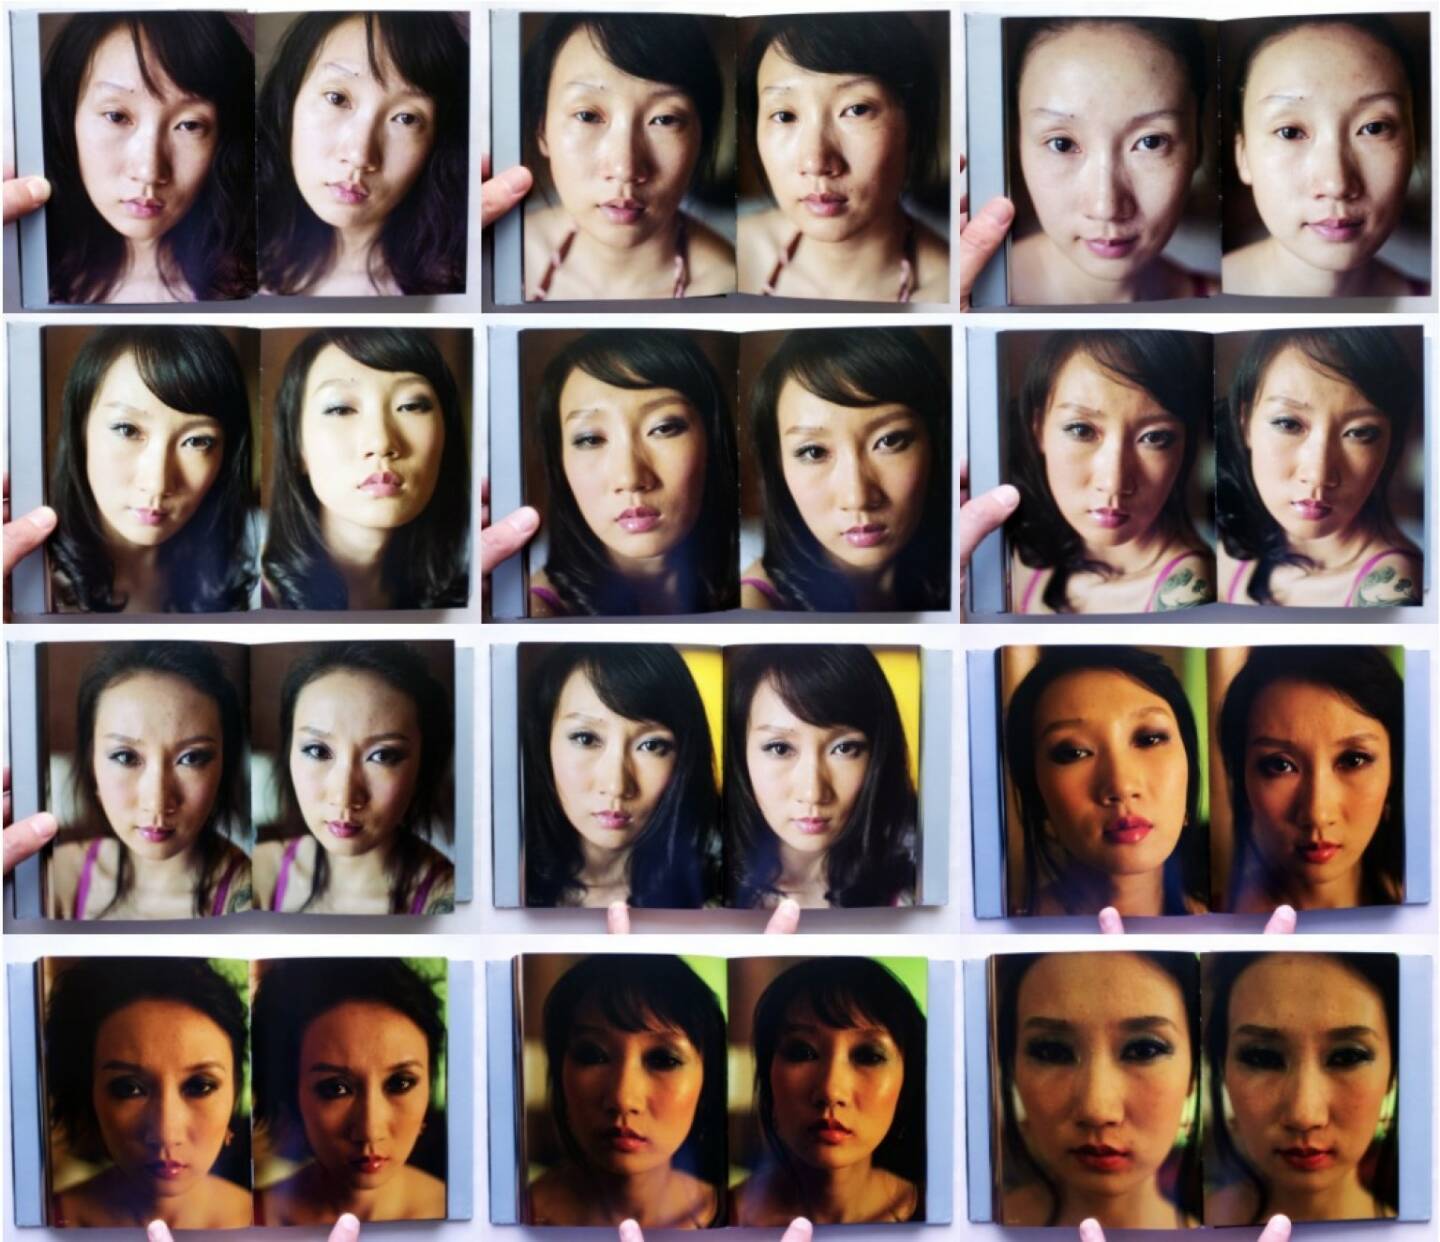 Xu Yong - This Face (徐勇《這張臉》), Culture of China Publication 2011, Beispielseiten, sample spreads - http://josefchladek.com/book/xu_yong_-_this_face_徐勇這張臉